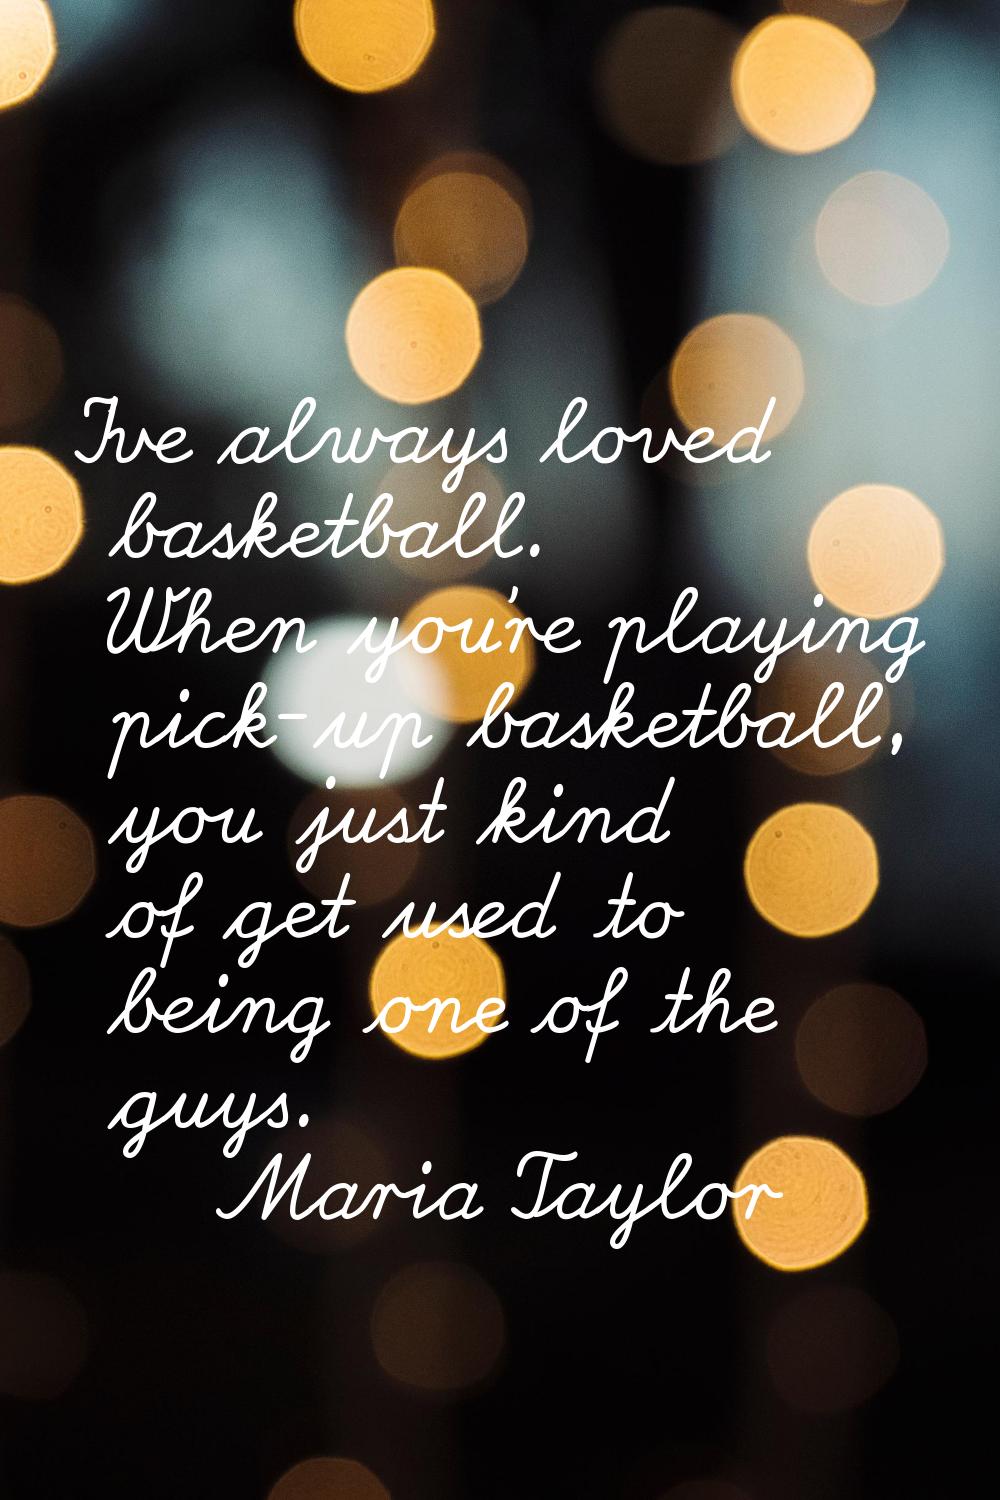 I’ve always loved basketball. When you’re playing pick-up basketball, you just kind of get used to 